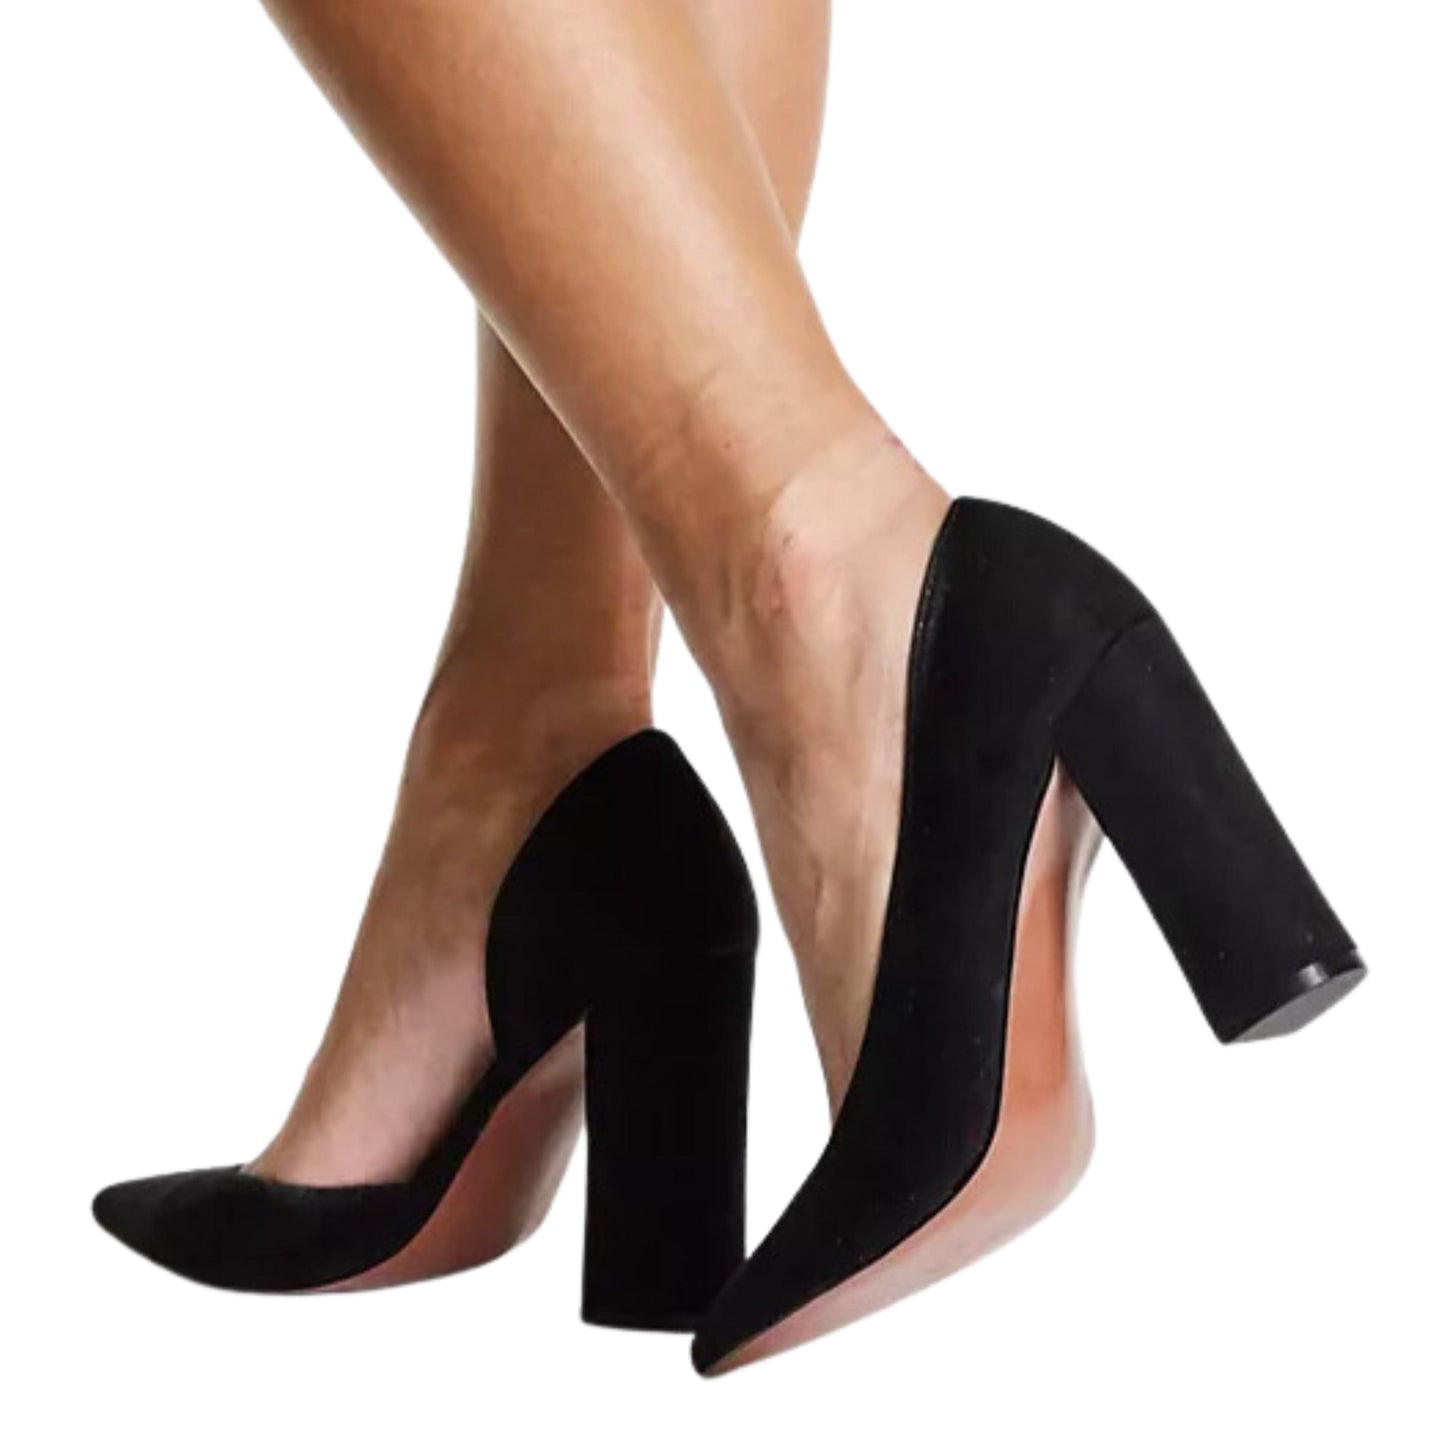 ASOS Womens Shoes 37 / Black ASOS -  Wide Fit Waiter d'orsay high heels